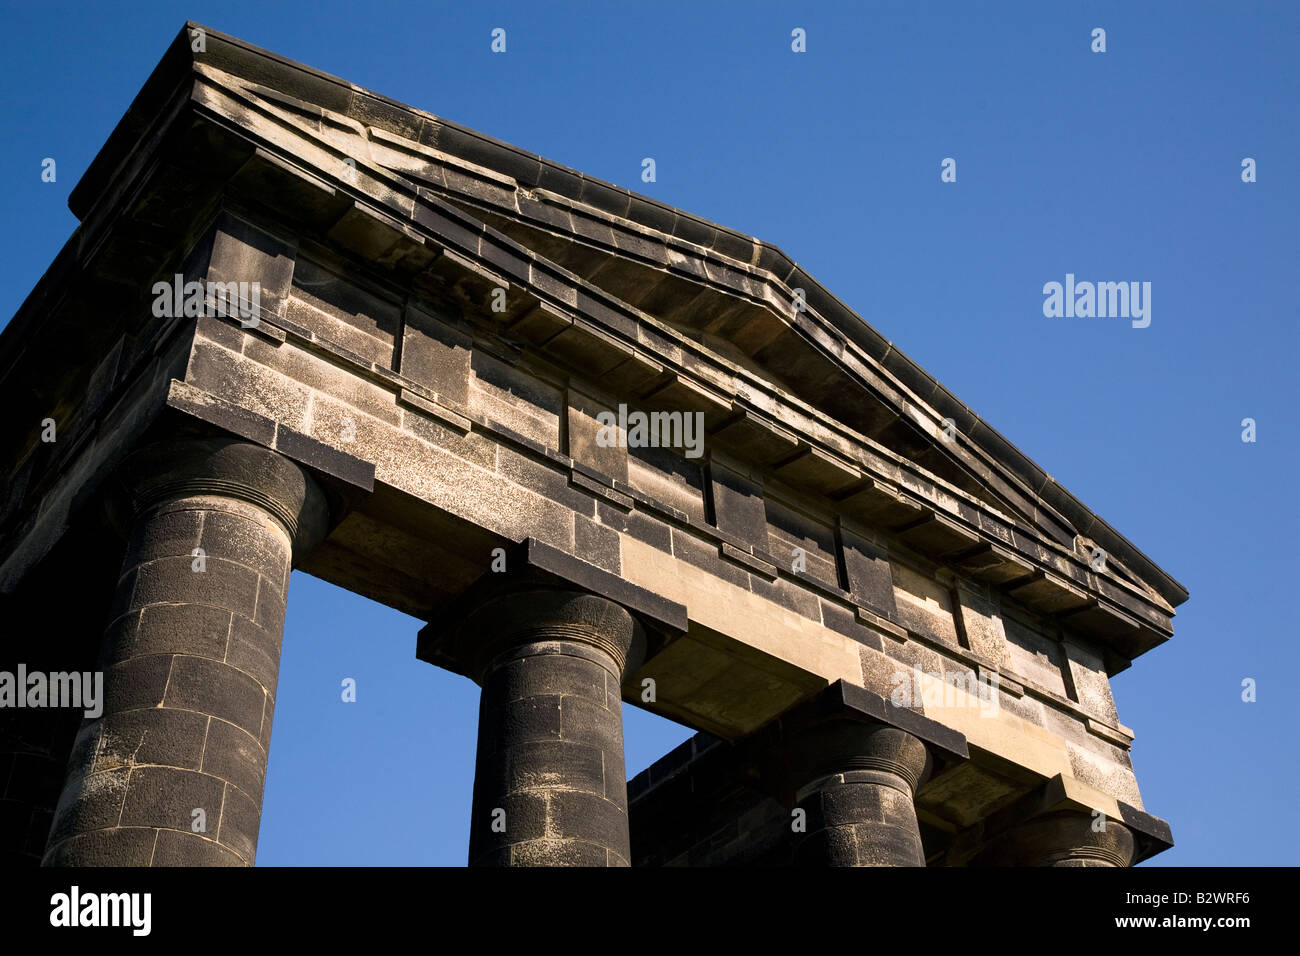 The pediment of Penshaw Monument in Sunderland. The Neo-Classical monument was built in honour of the Earl of Durham. Stock Photo